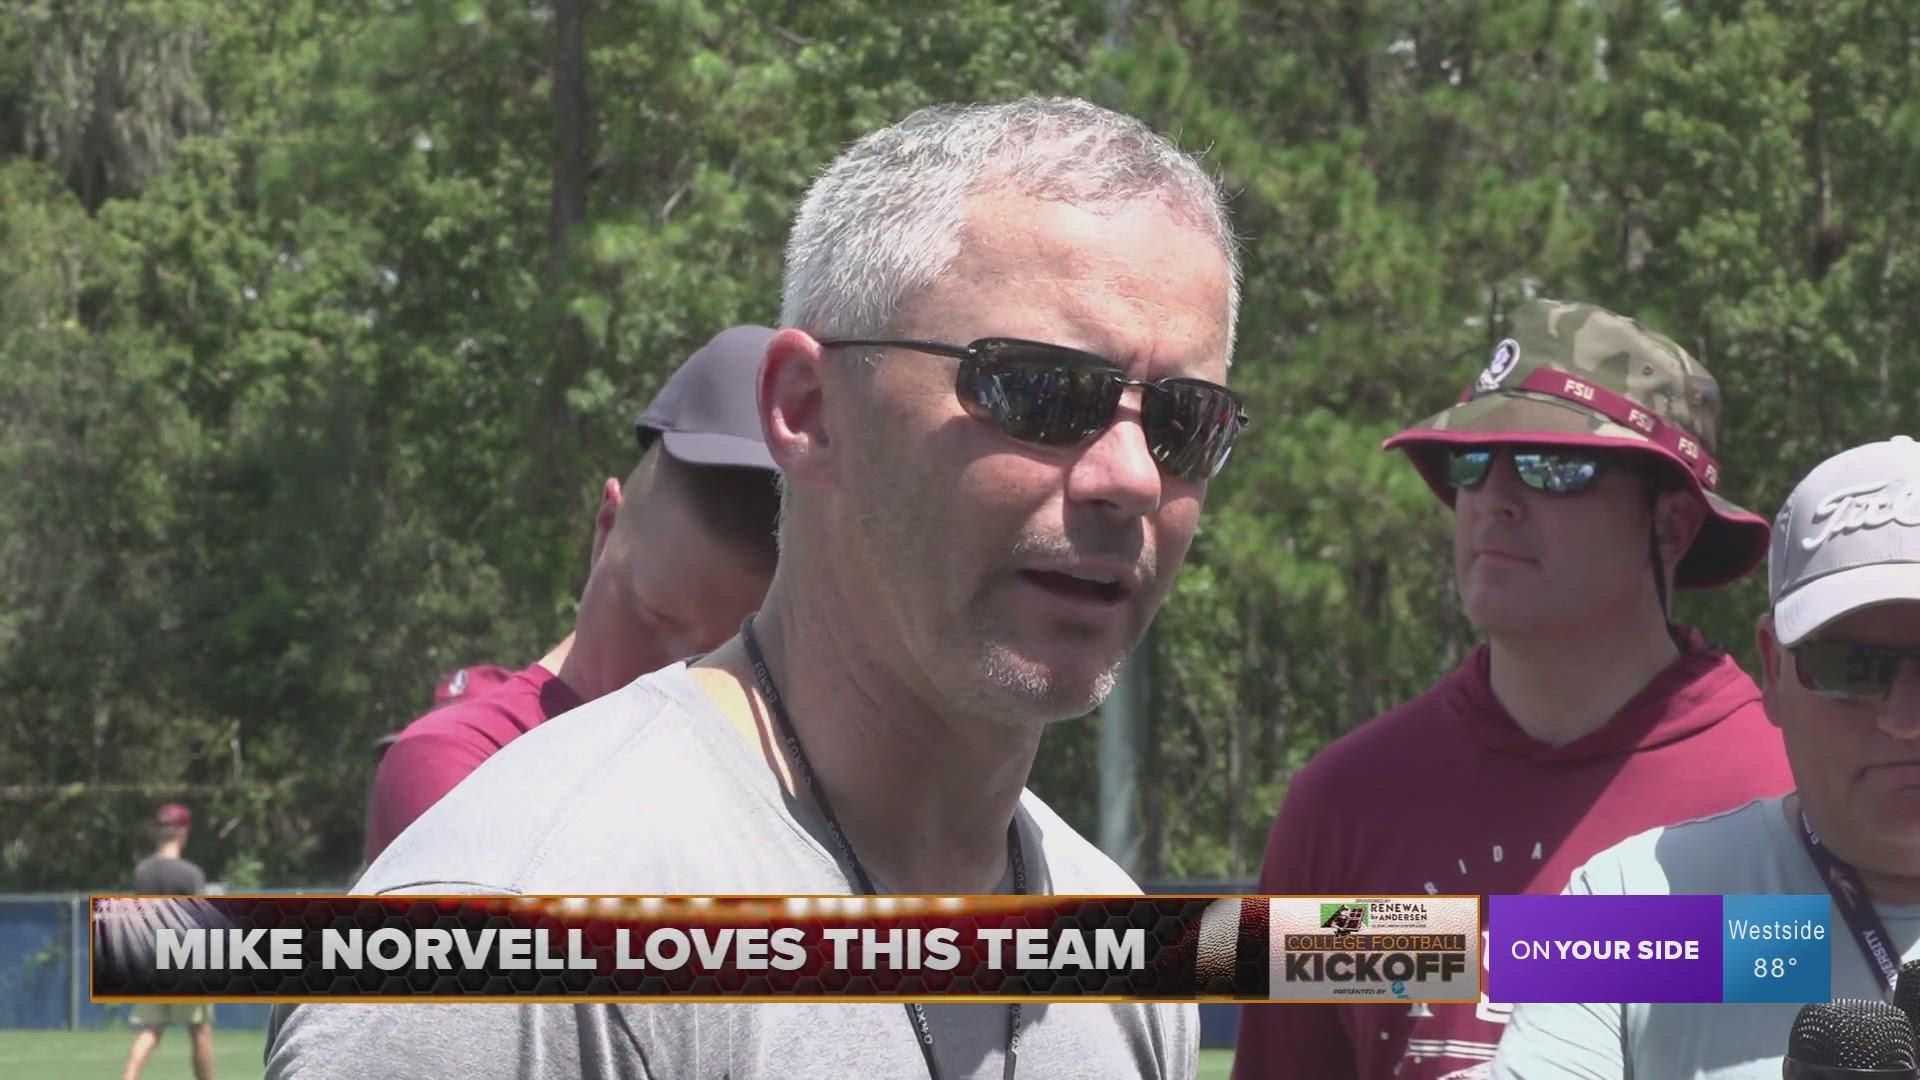 The Seminoles host practice in Jacksonville before each season. It's a new tradition Mike Norvell added to program for the heat elements.